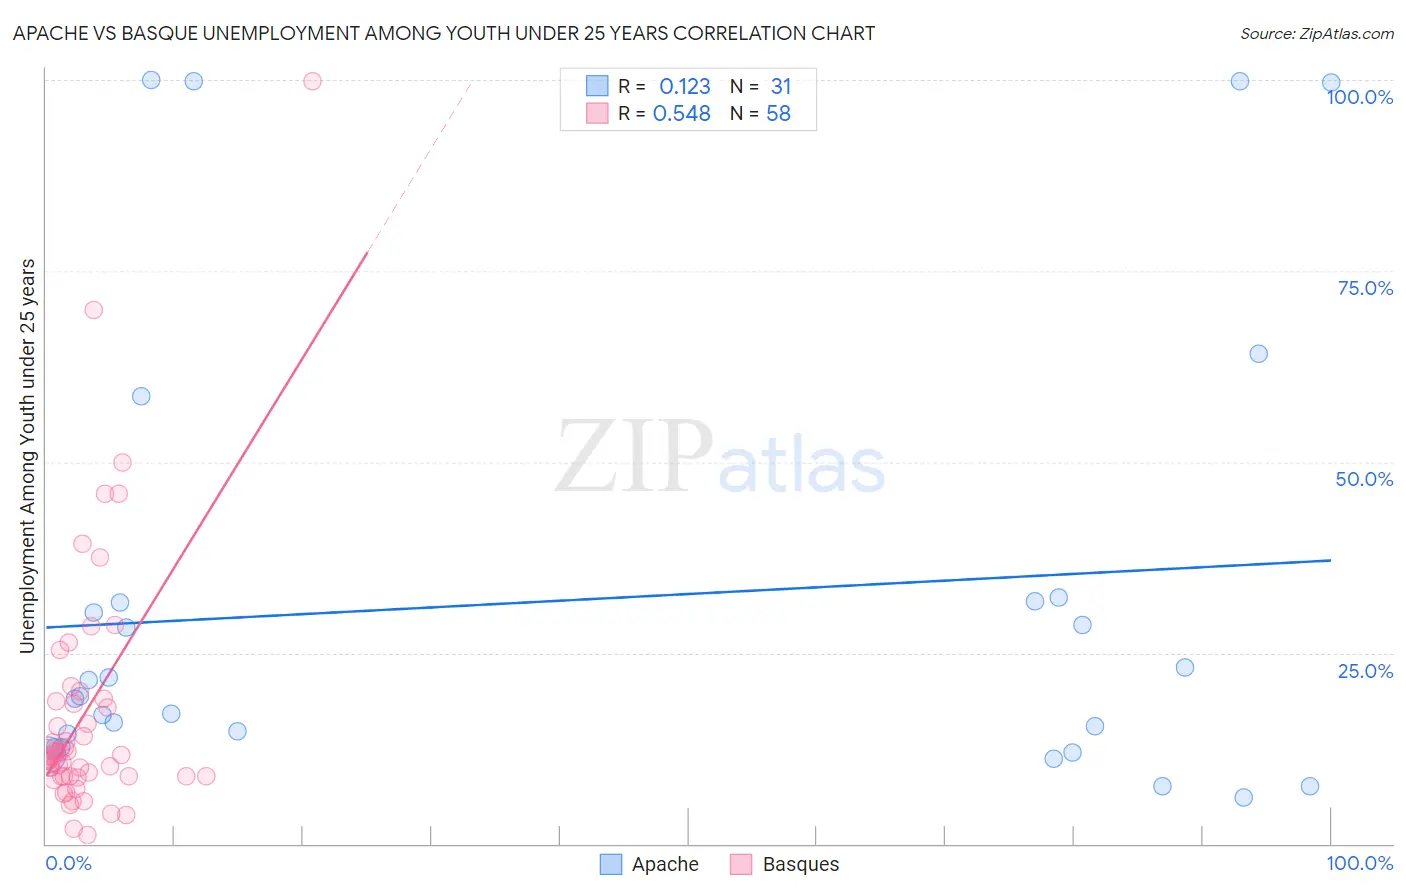 Apache vs Basque Unemployment Among Youth under 25 years